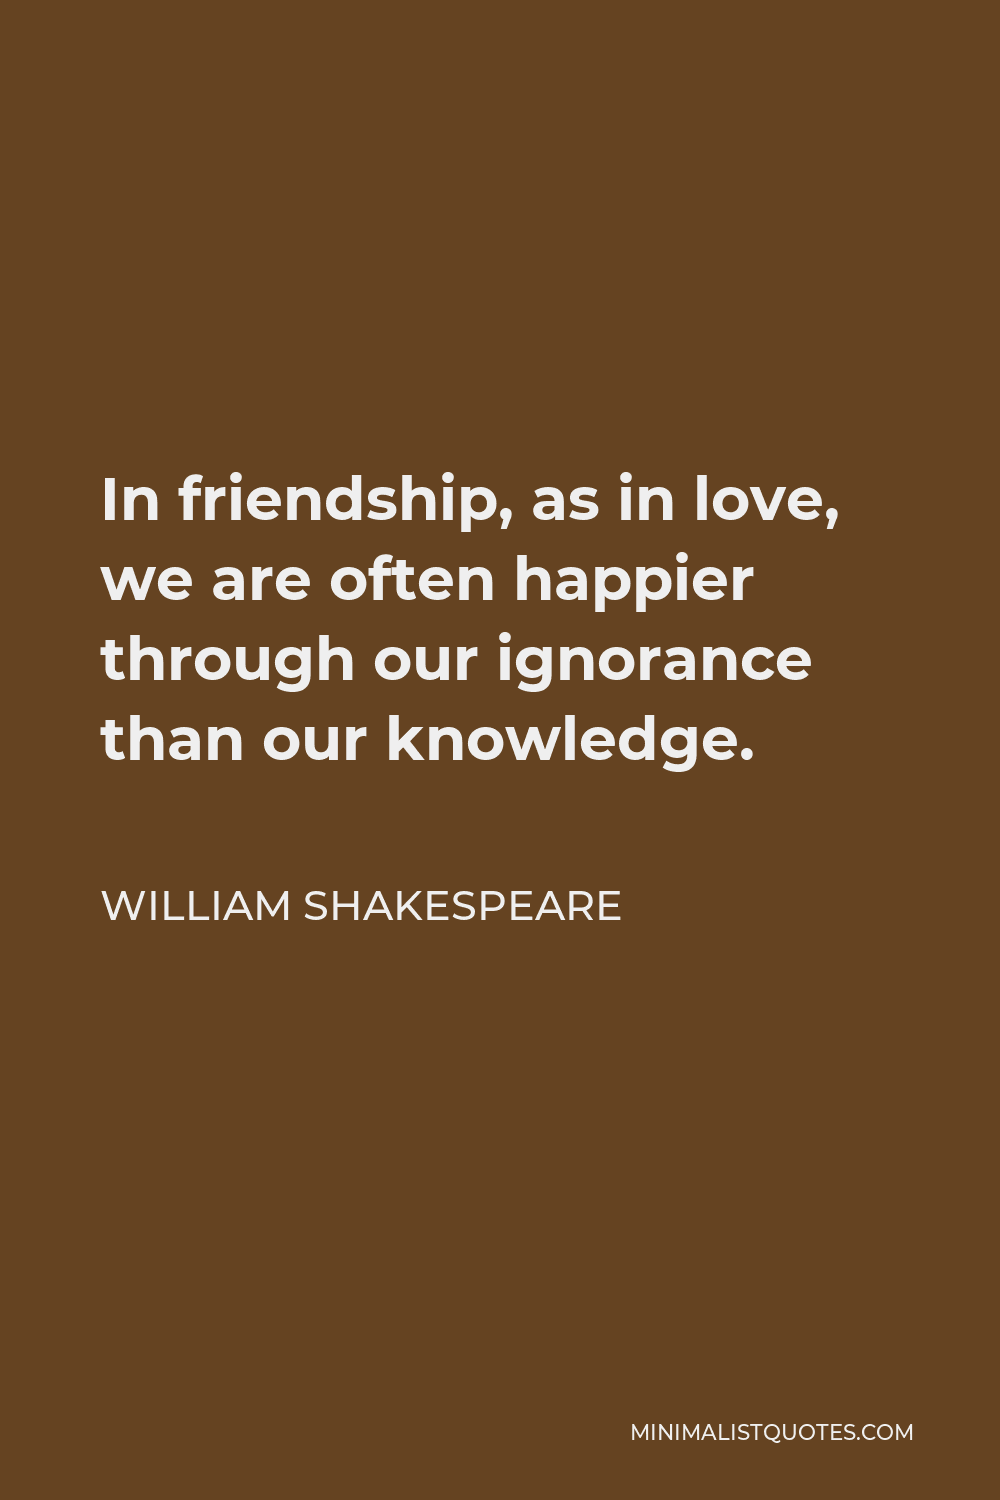 William Shakespeare Quote - In friendship, as in love, we are often happier through our ignorance than our knowledge.